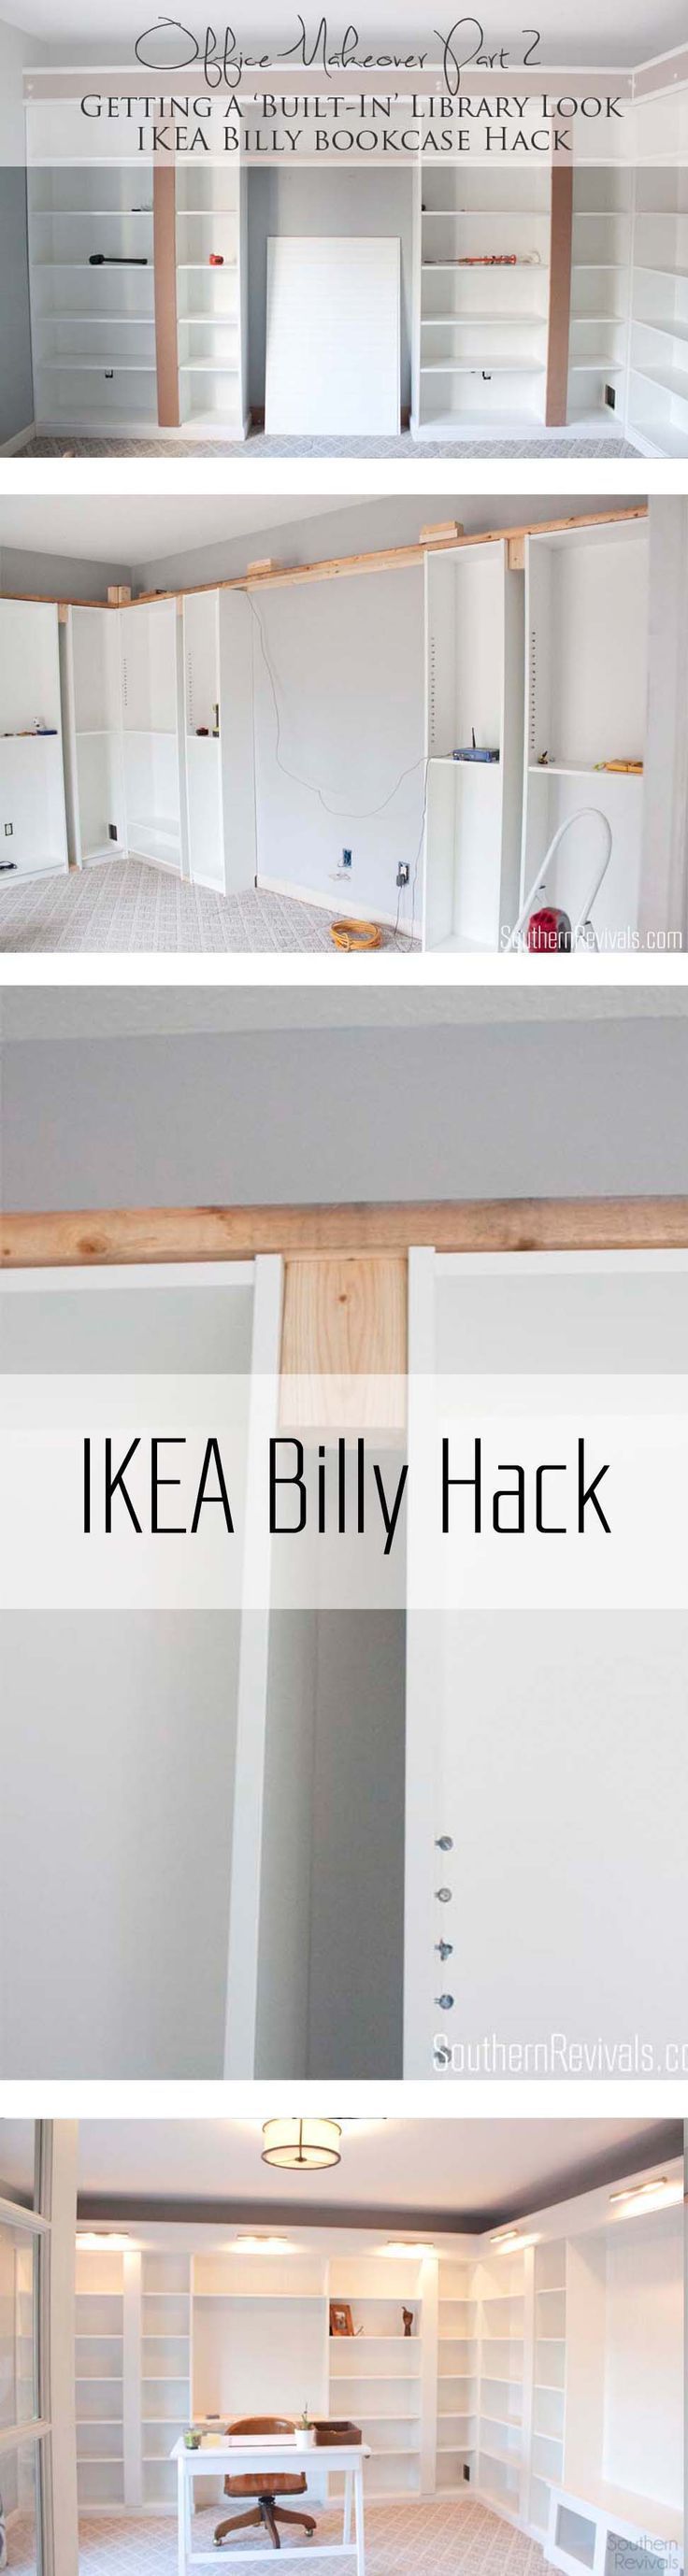 IKEA Hack with built-in Billy bookcases - how we got an expensive built-in libra...